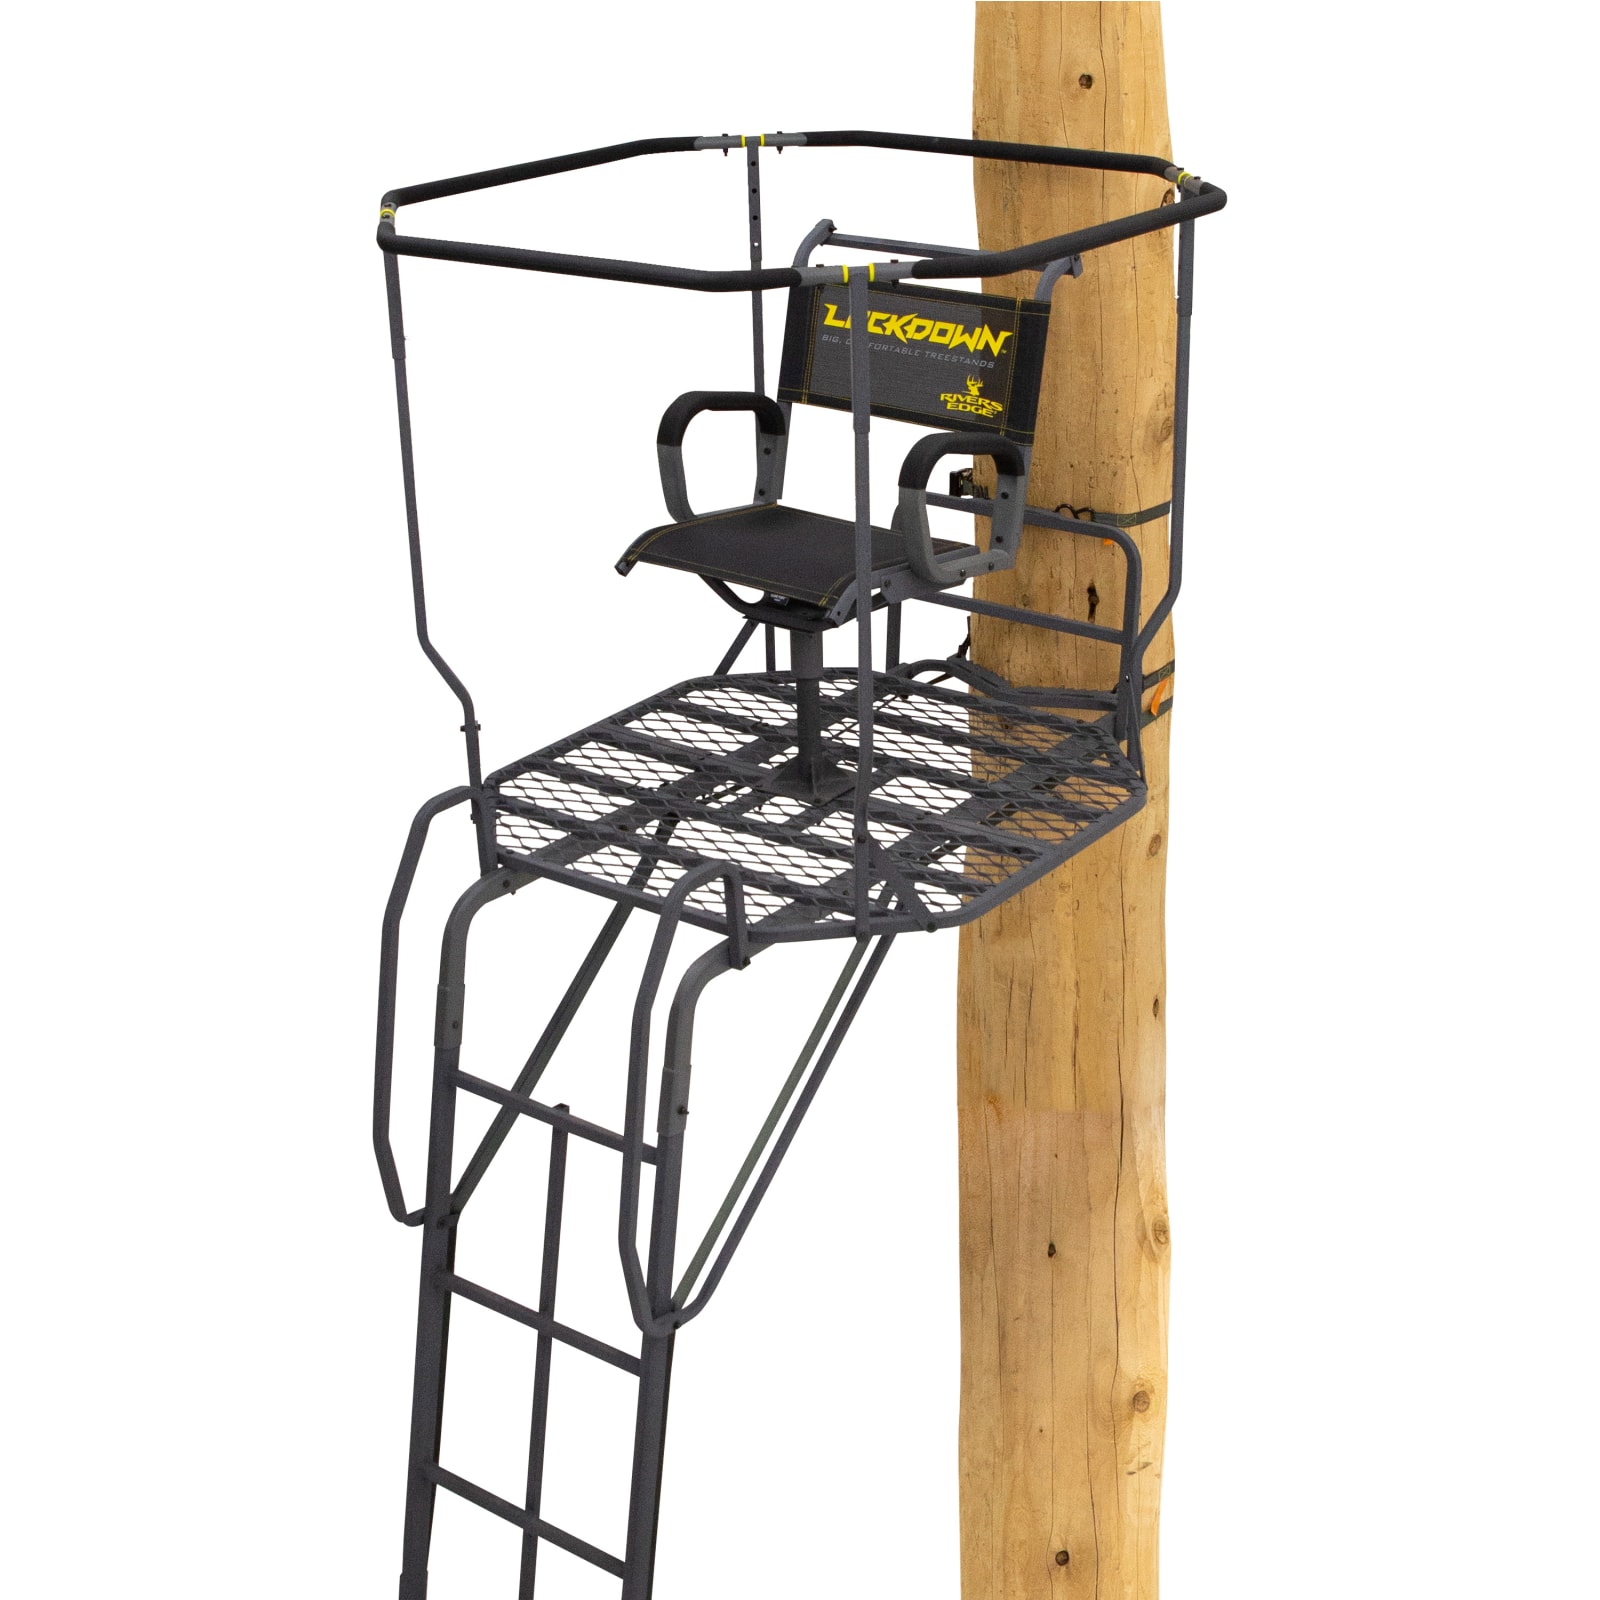 Remote Control for Rotating Tree Stand (B)